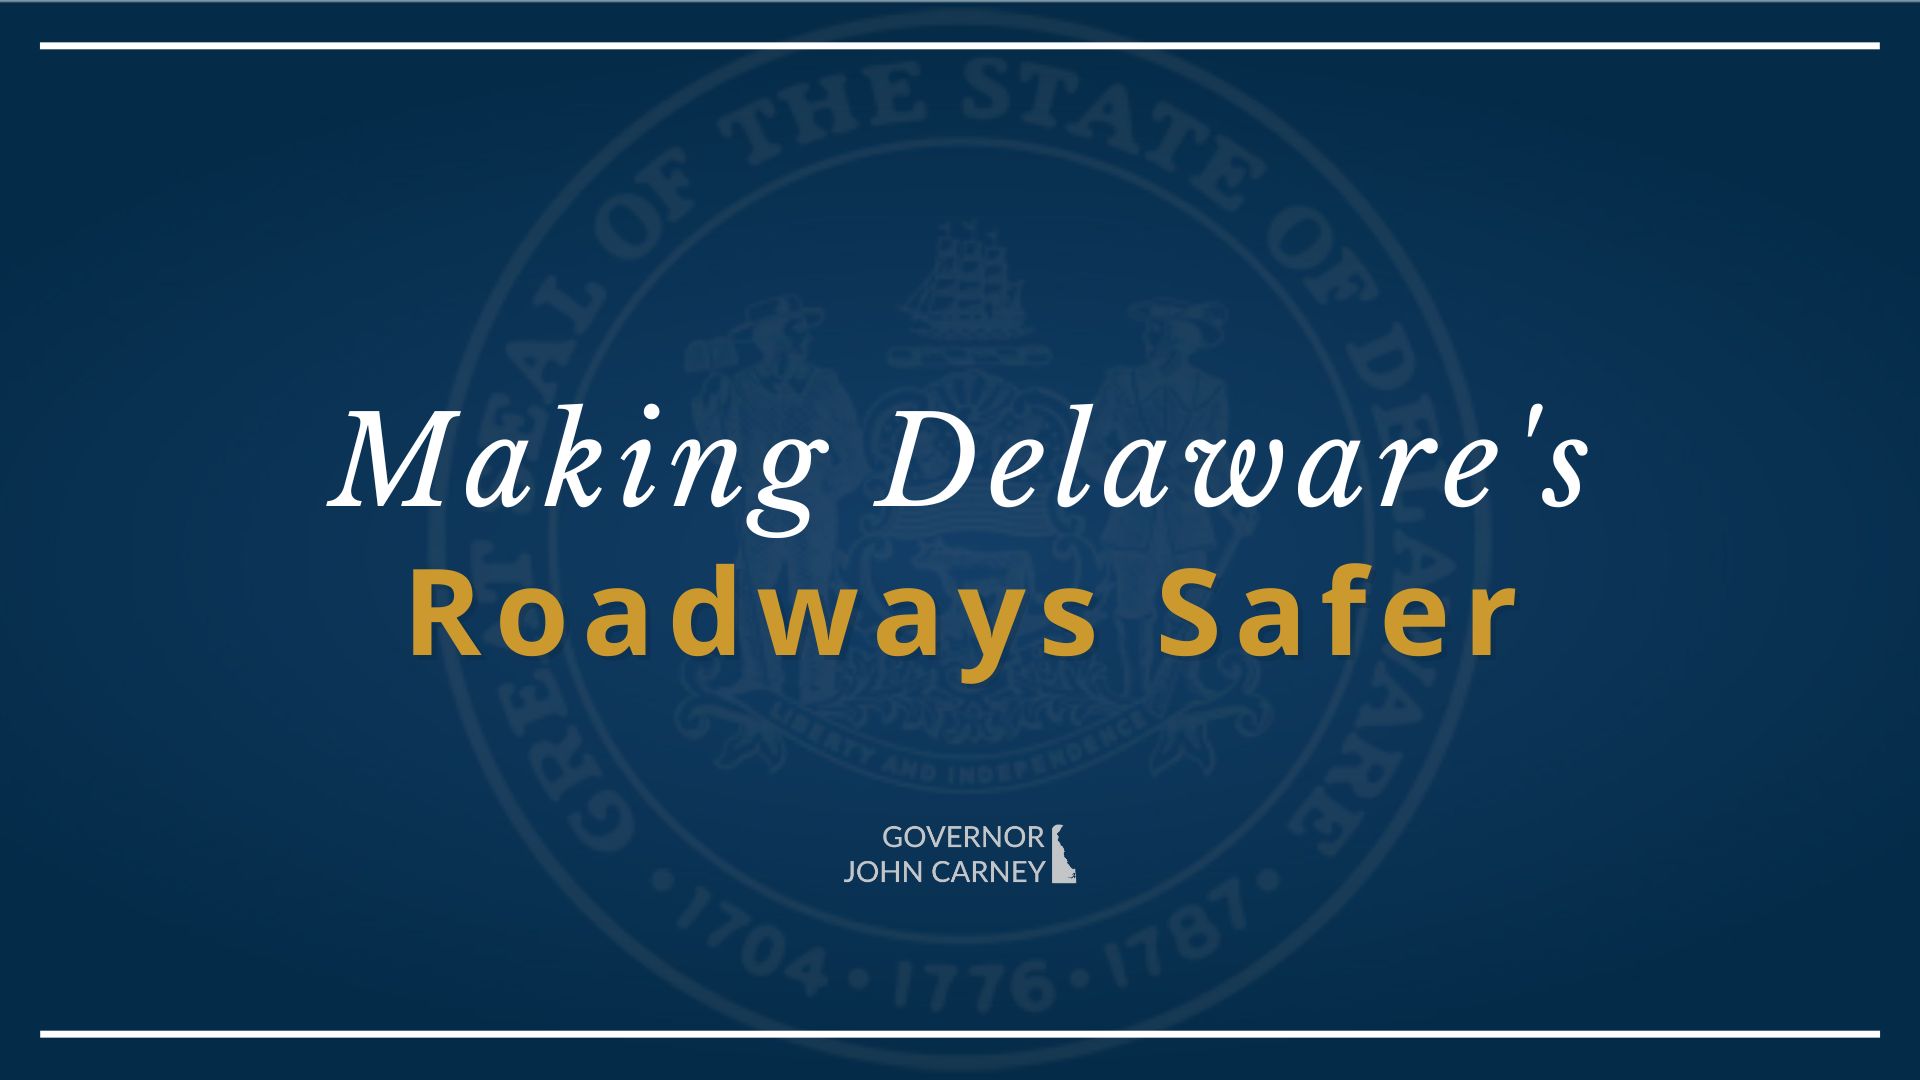 Image with text "Making Delaware's roadways safer"